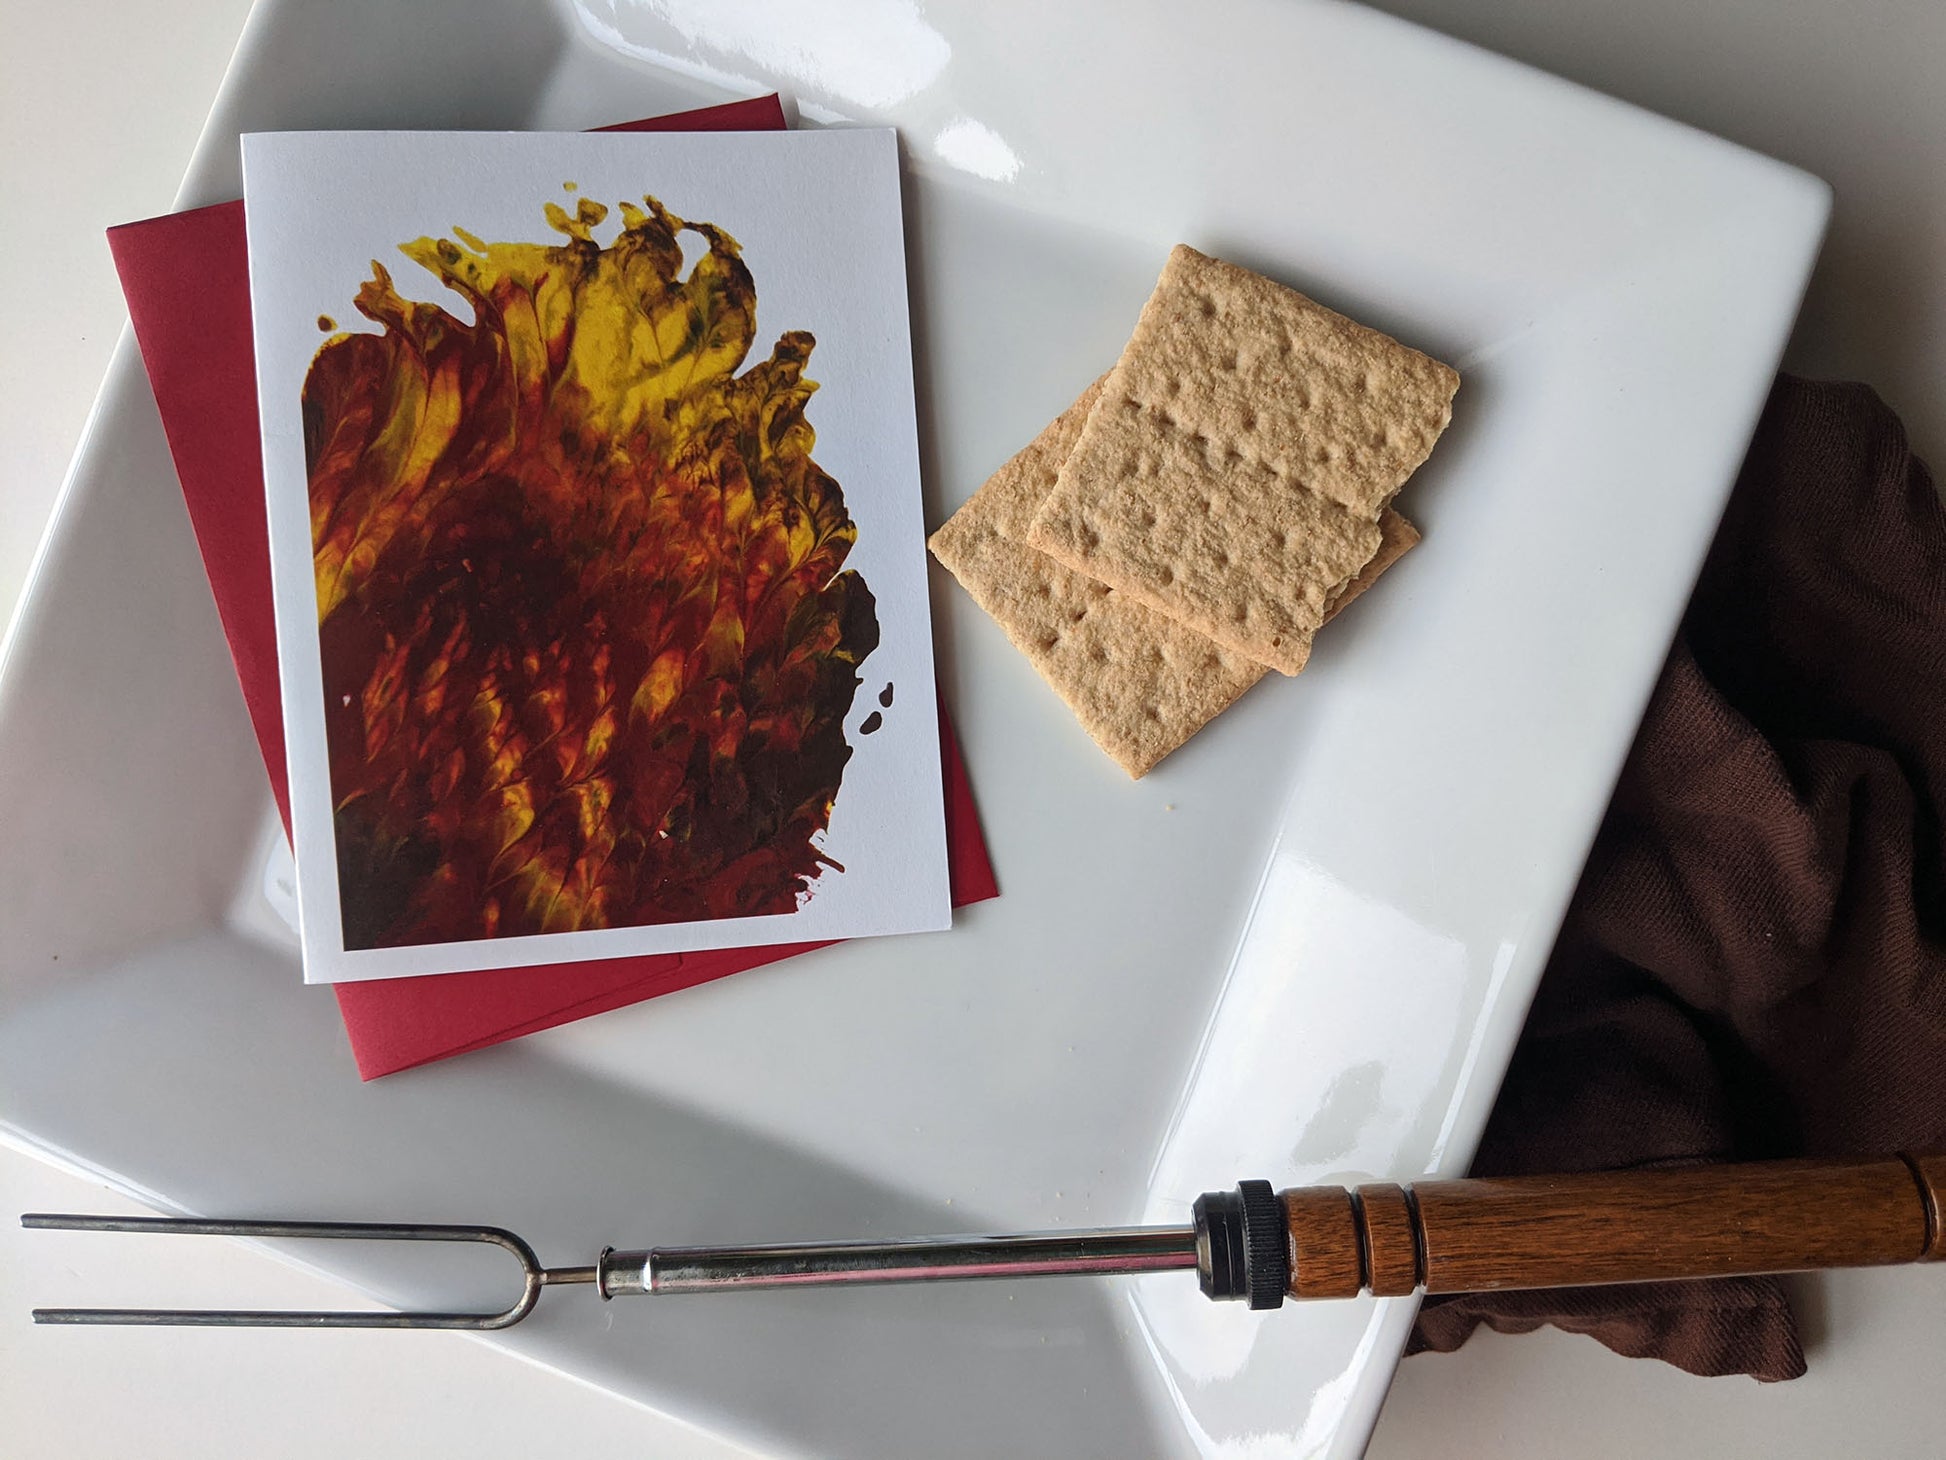 Greeting card with abstract art that looks like flames sitting on a square, white plate, with a red envelope, graham crackers, a smore roasting stick and a brown cloth napkin.